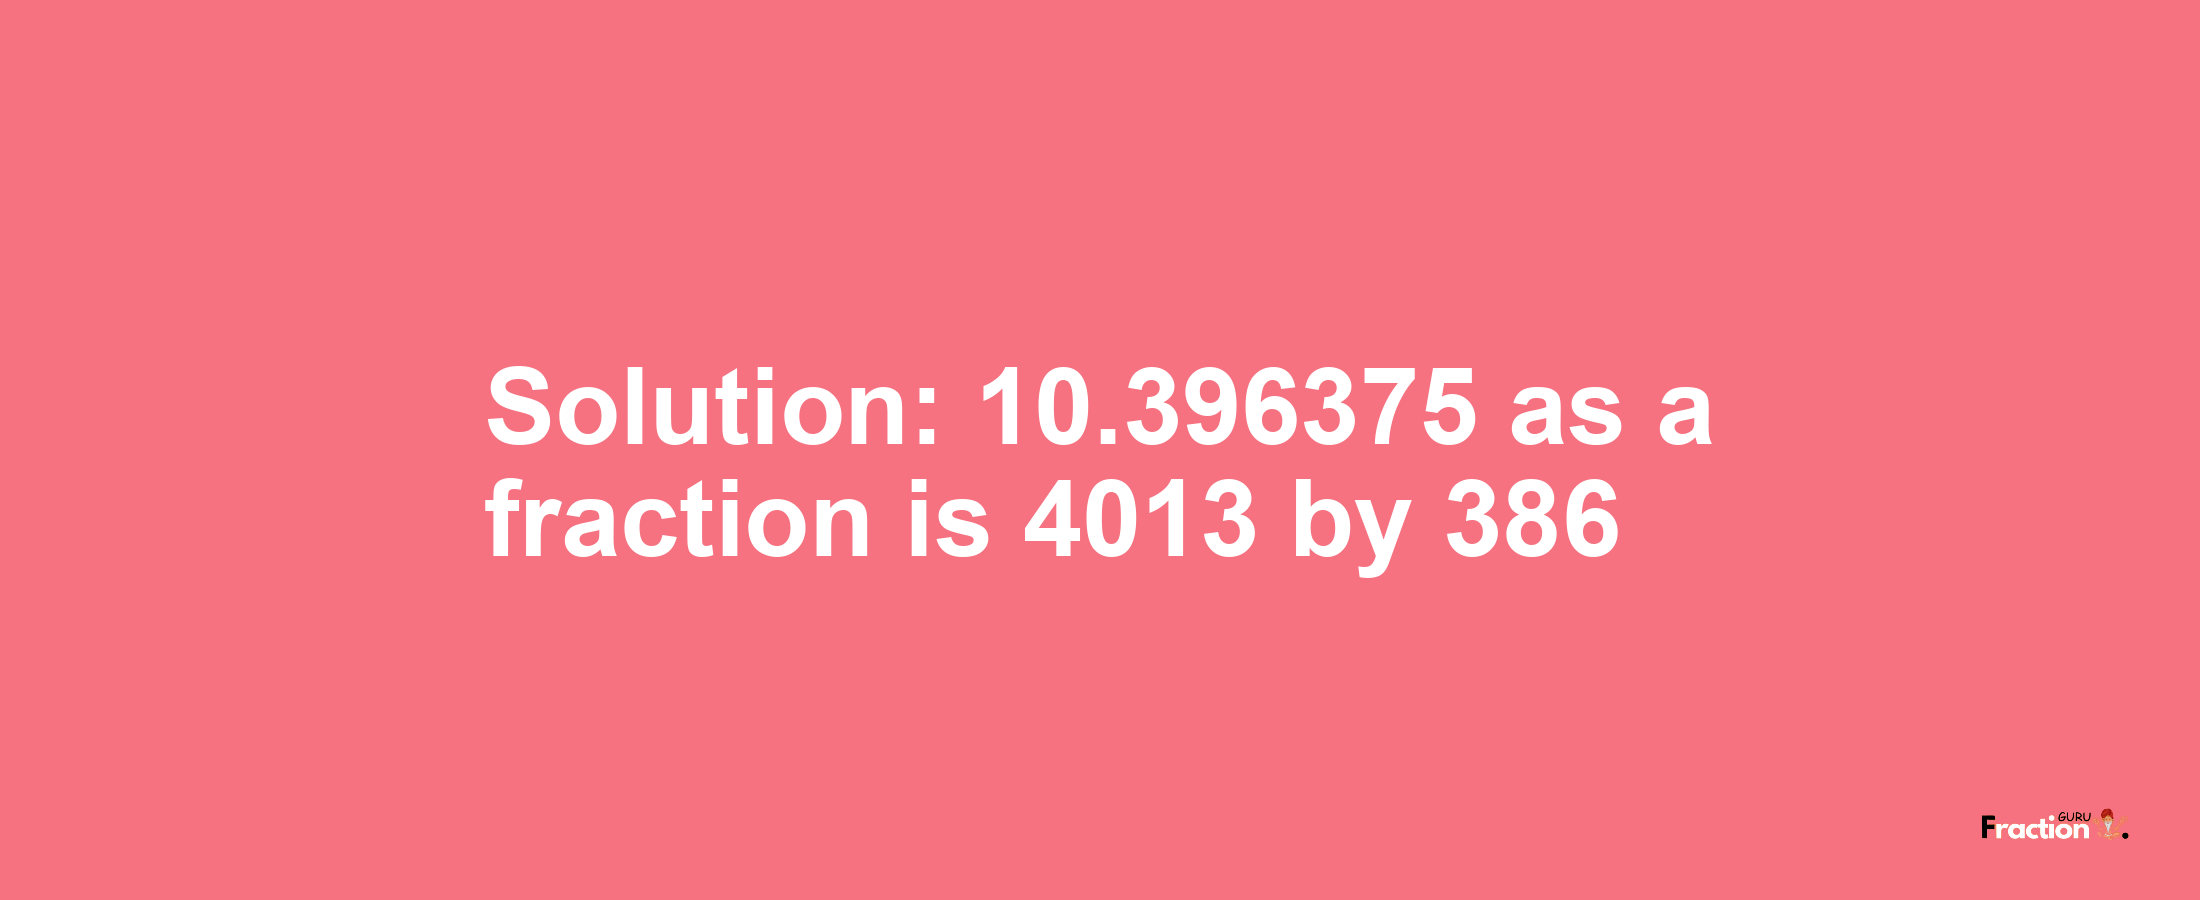 Solution:10.396375 as a fraction is 4013/386